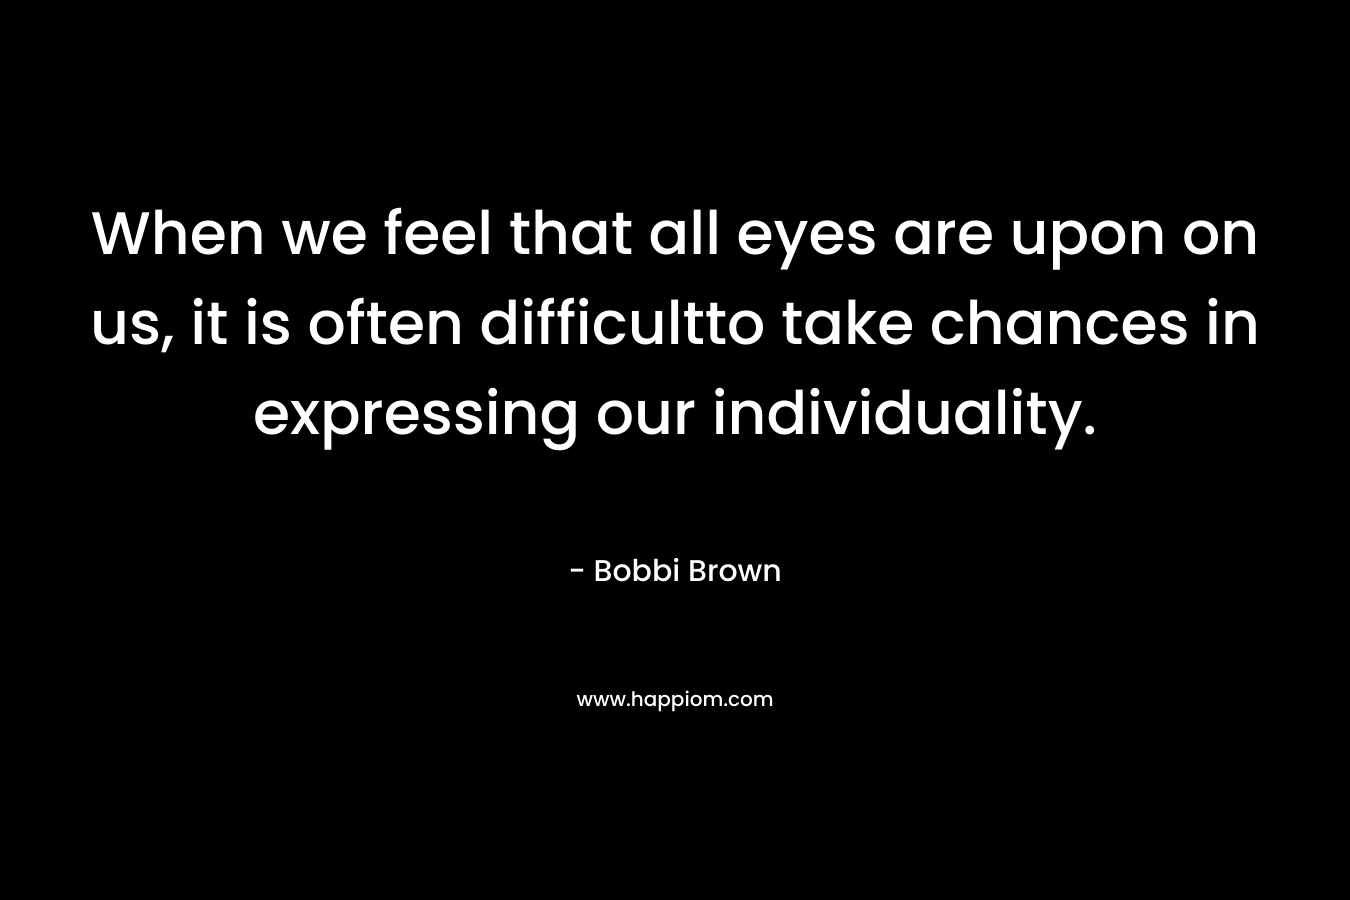 When we feel that all eyes are upon on us, it is often difficultto take chances in expressing our individuality. – Bobbi Brown